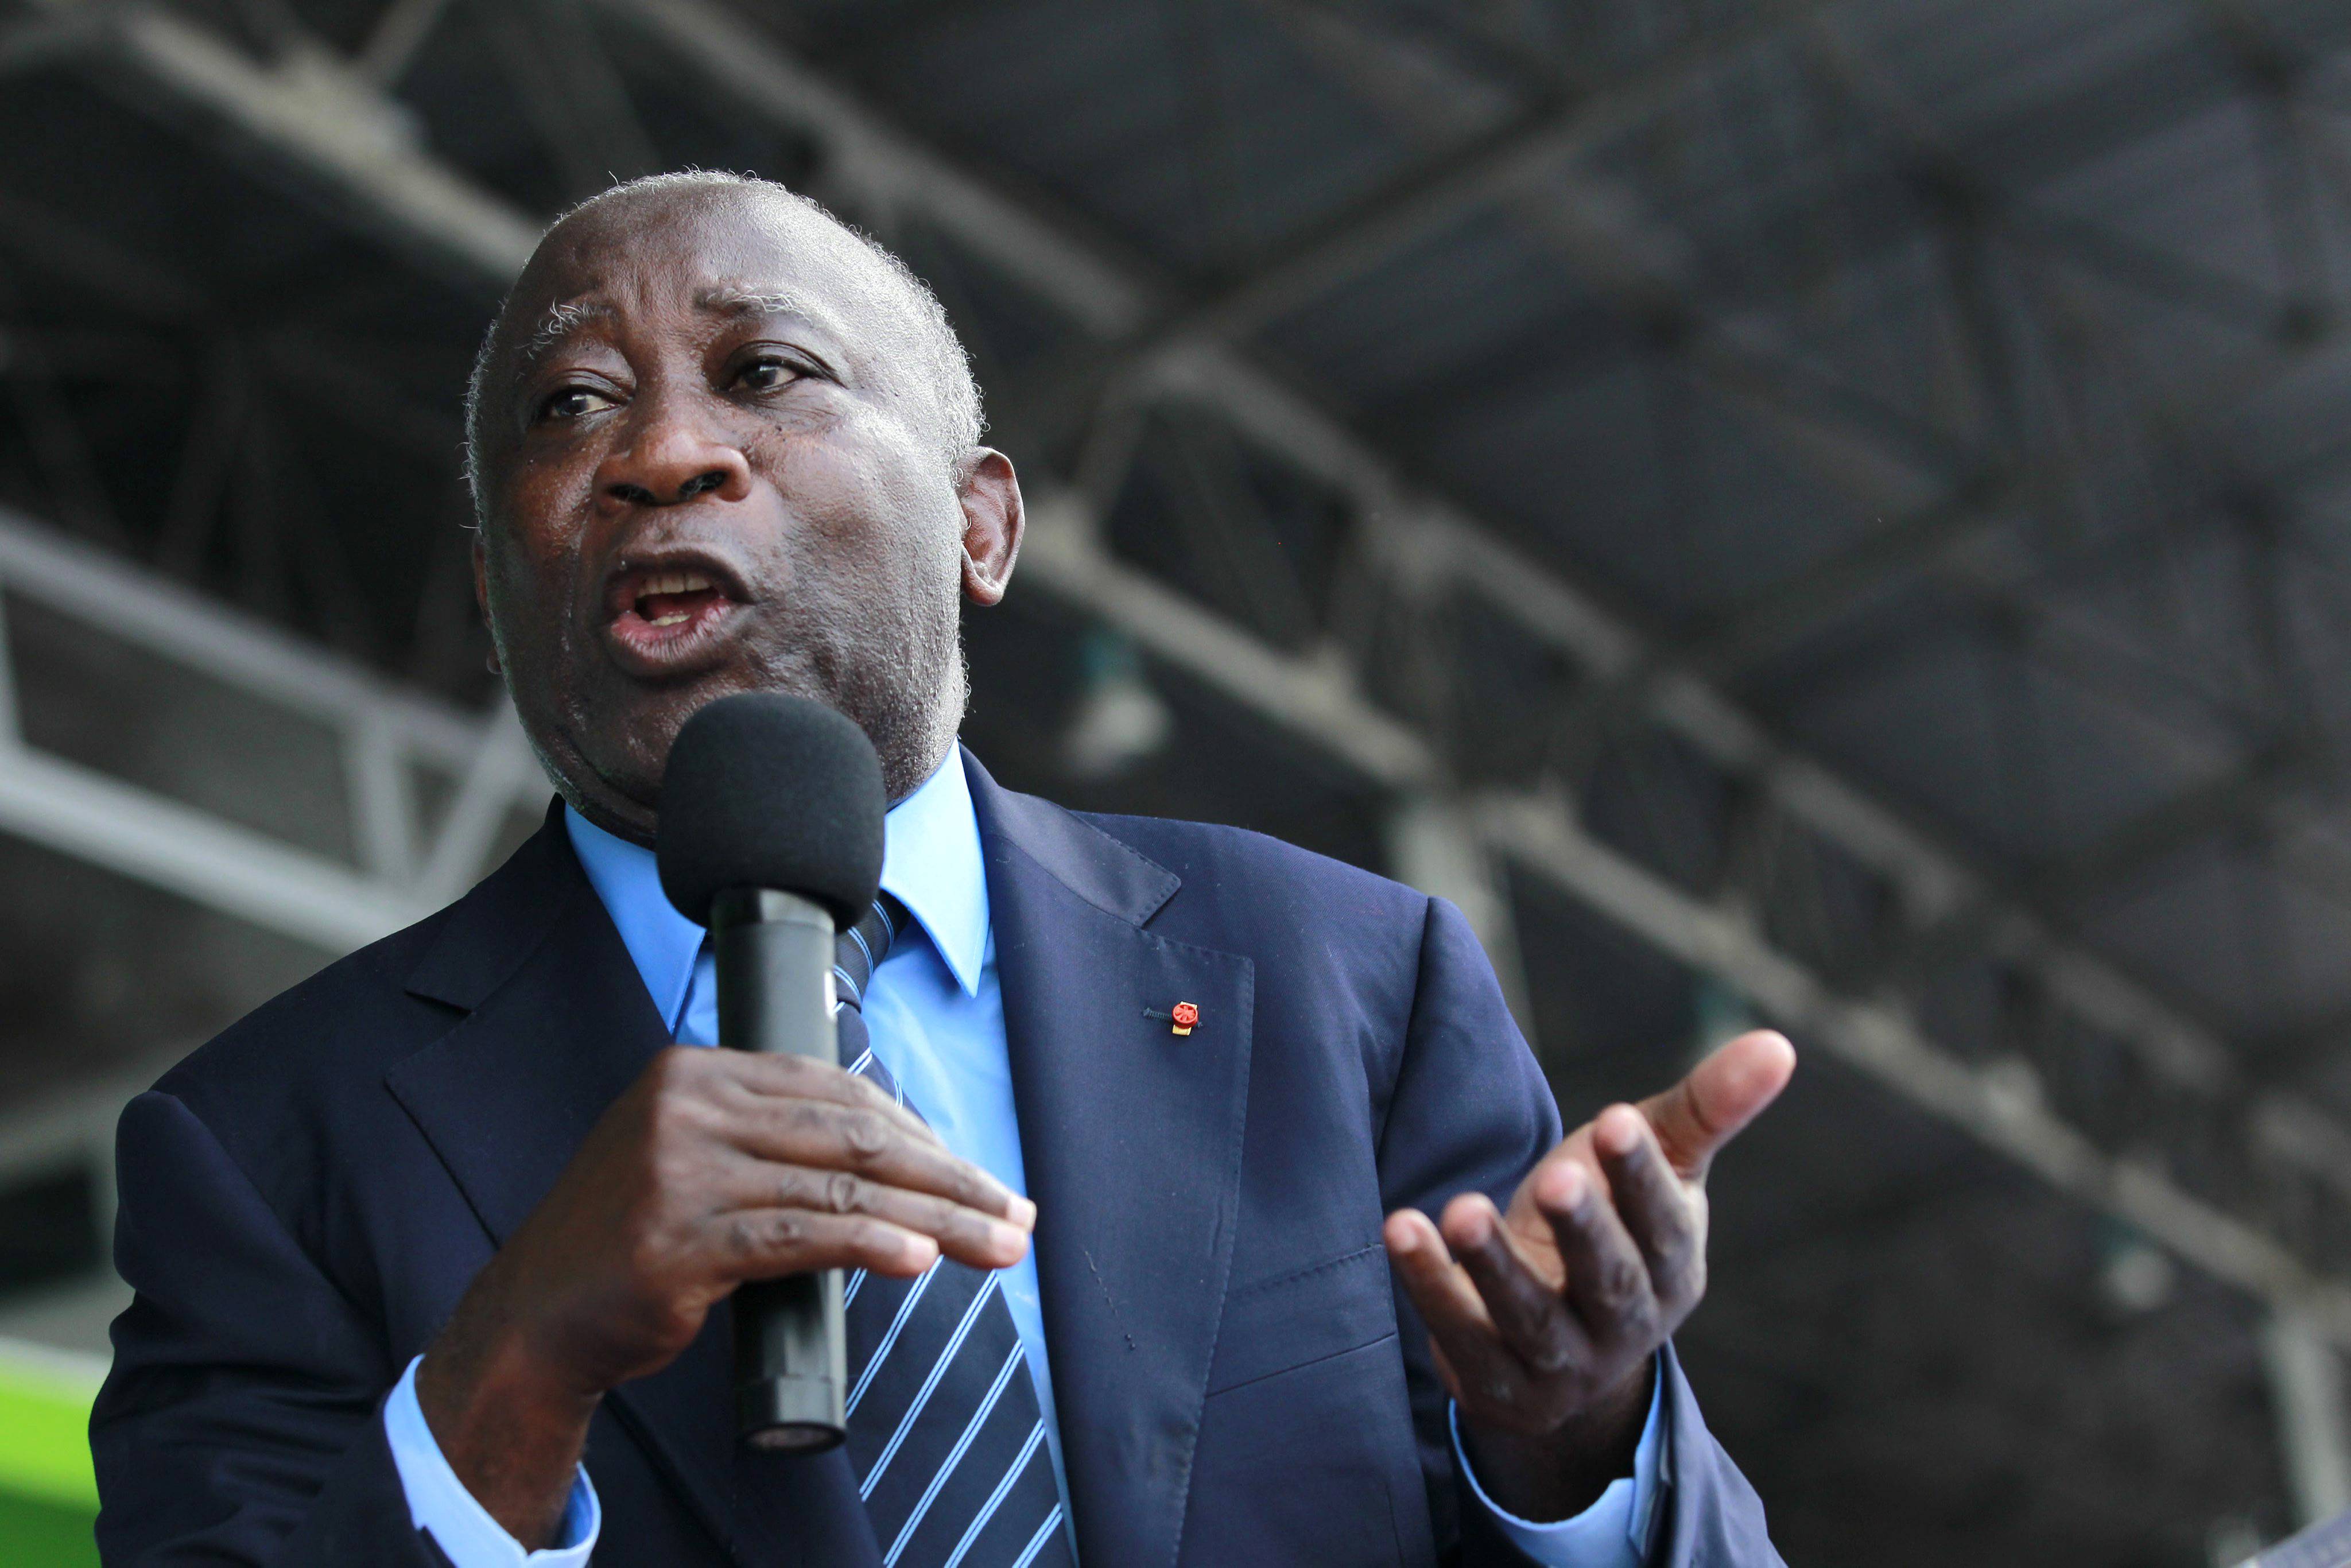 Ex-Ivory Coast President Faces Rape and Murder Charges - Former Ivory Coast president Laurent Gbagbo was taken into custody at the International Criminal Court Wednesday, where he will face charges of crimes against humanity including murder and rape, stemming from his involvement in fueling post-election violence.\r&nbsp;\r(Photo: EPA/NIC BOTHMA /LANDOV)